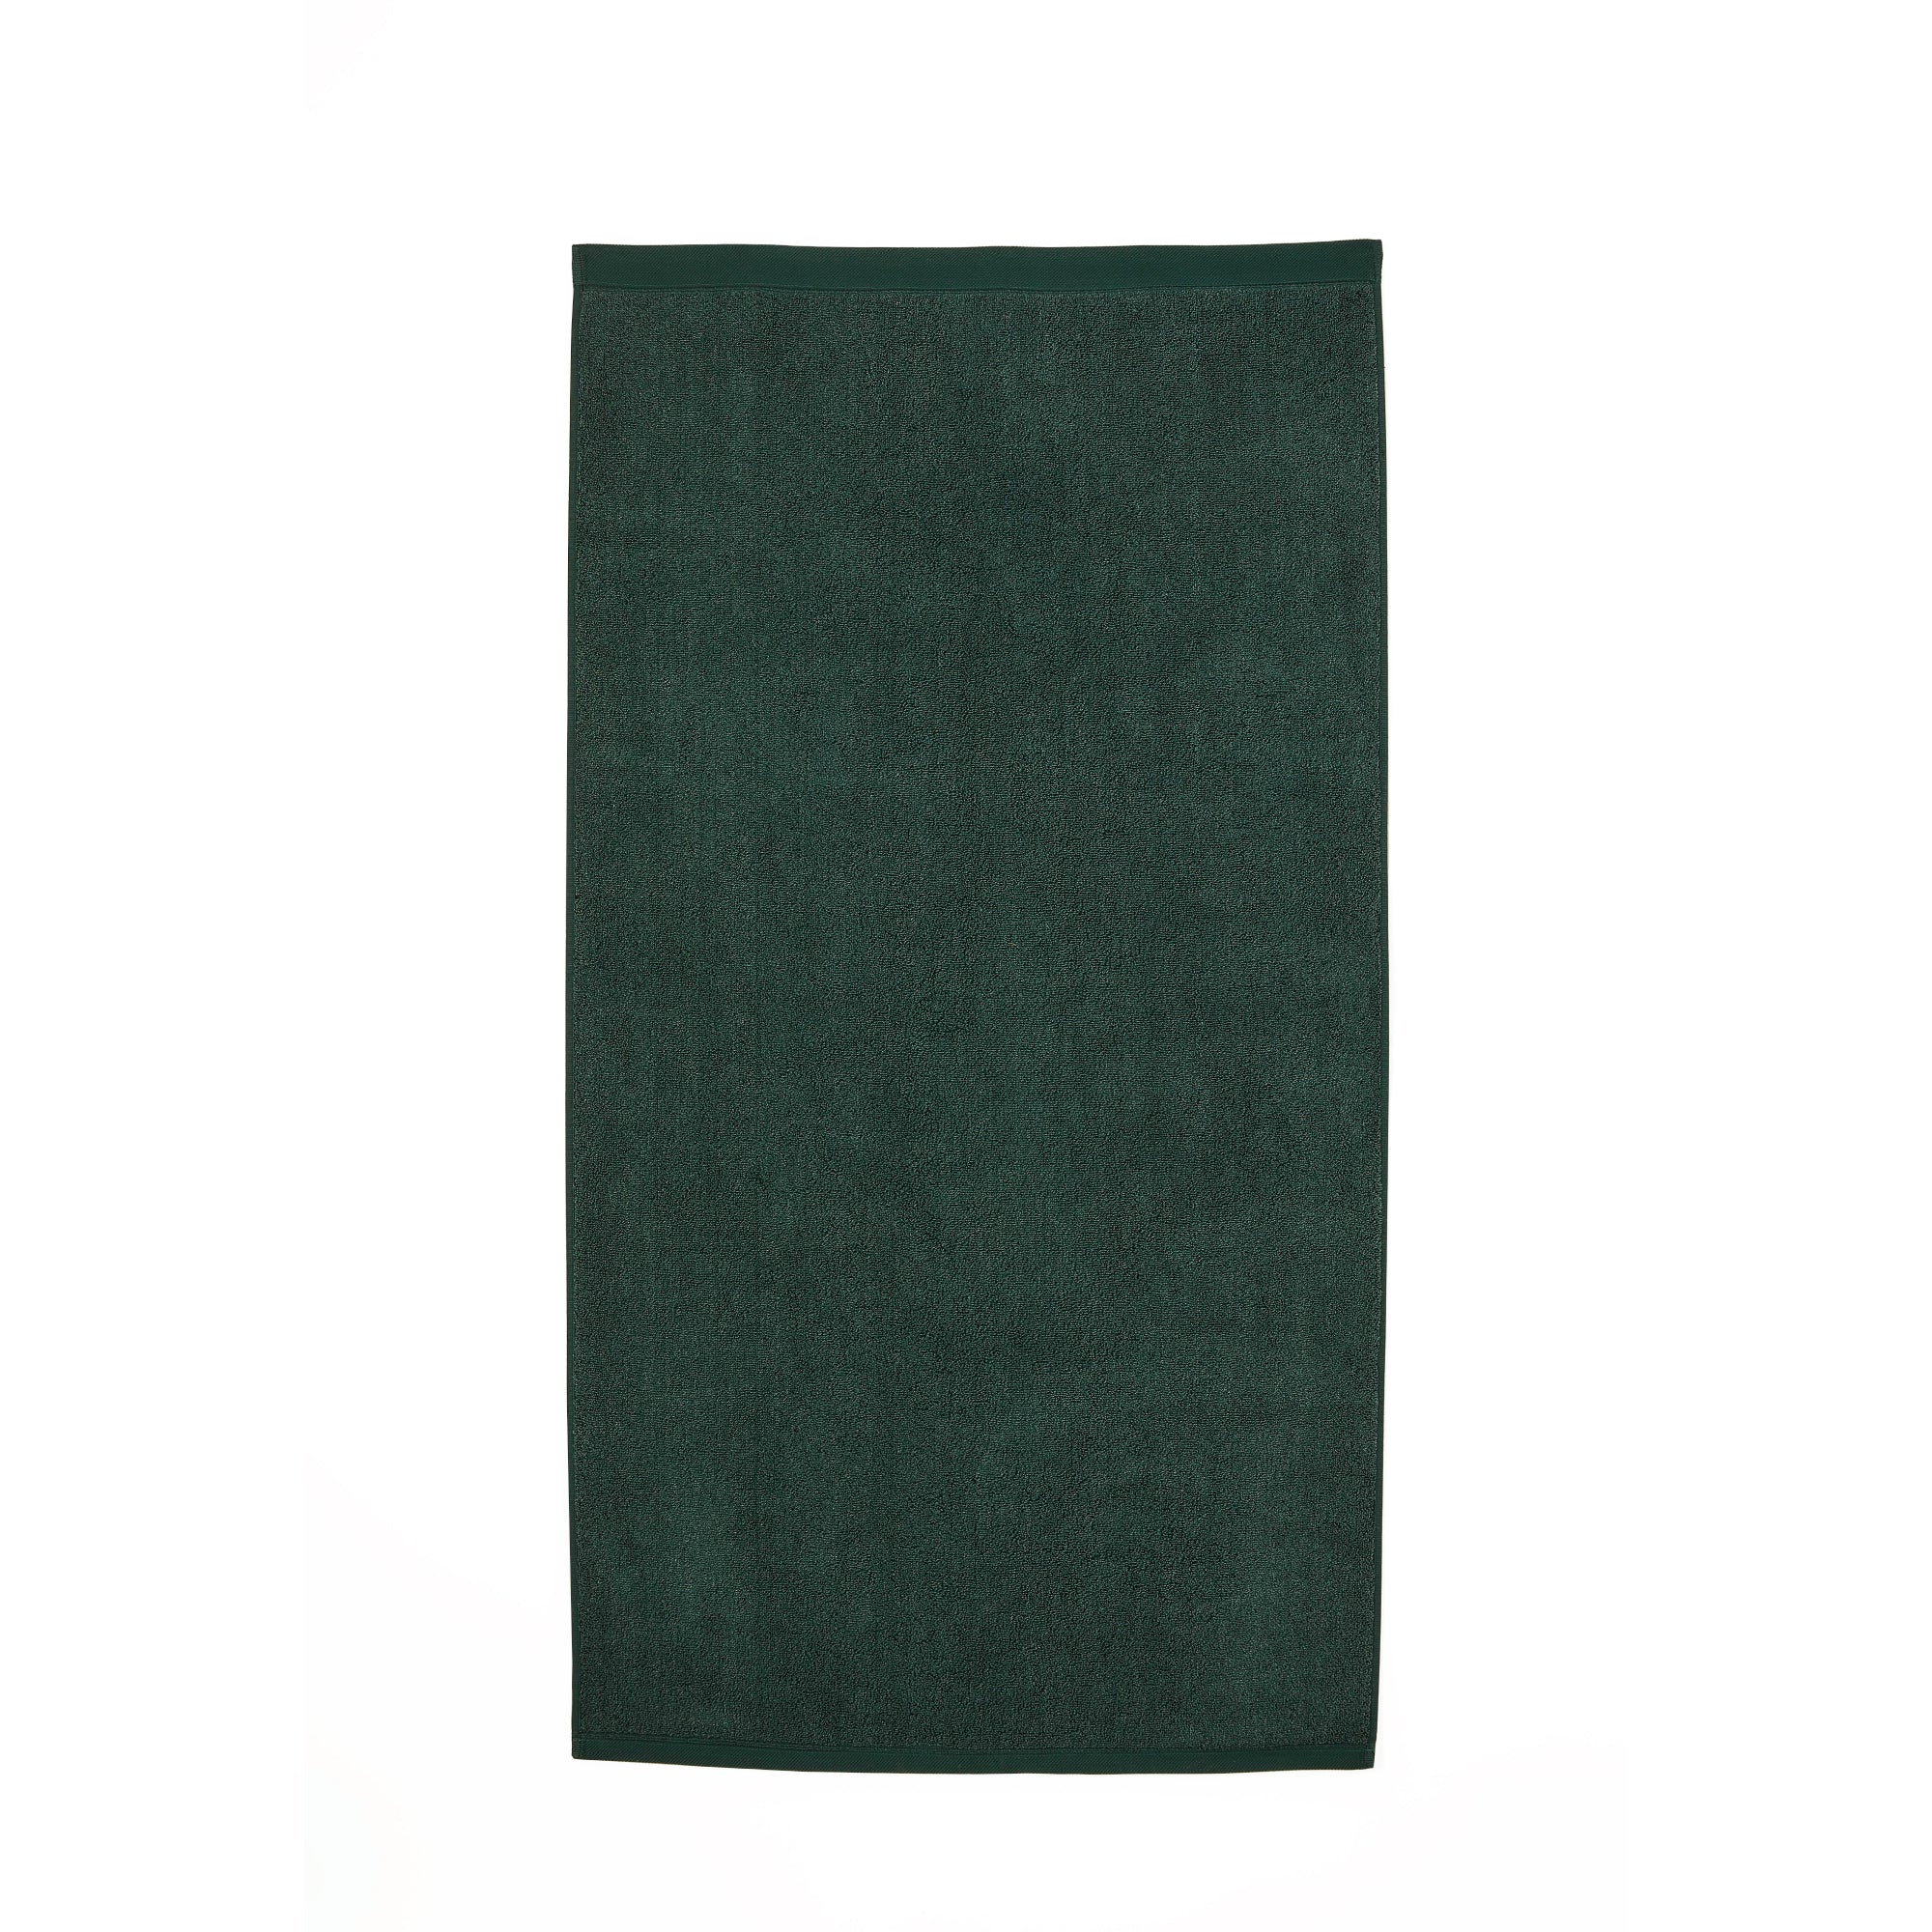 Hand Towel (2 pack) Abode Eco by Drift Home in Deep Green